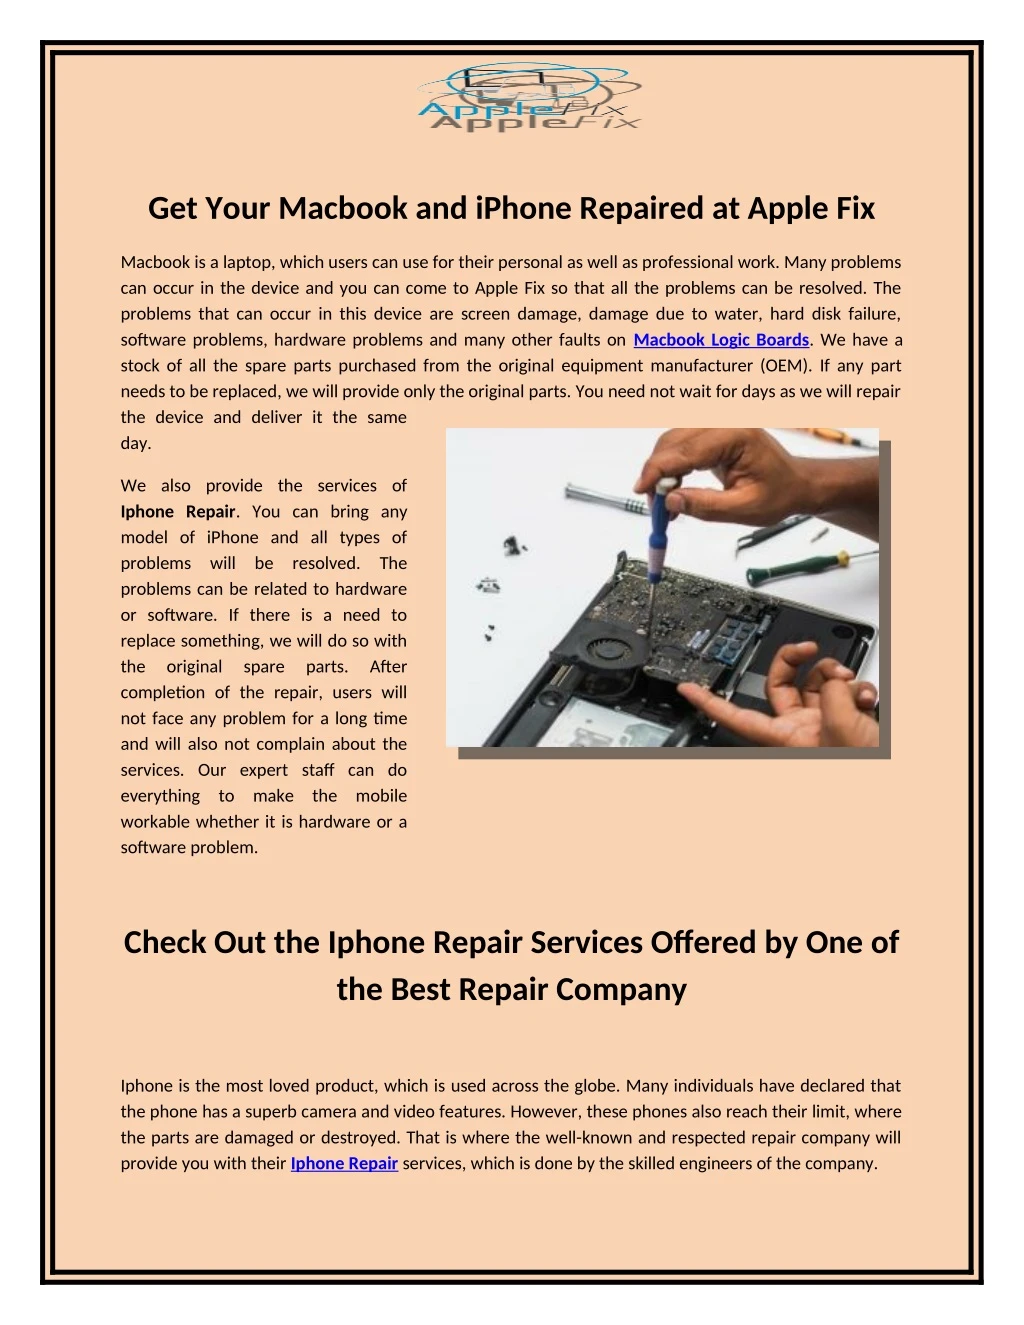 get your macbook and iphone repaired at apple fix